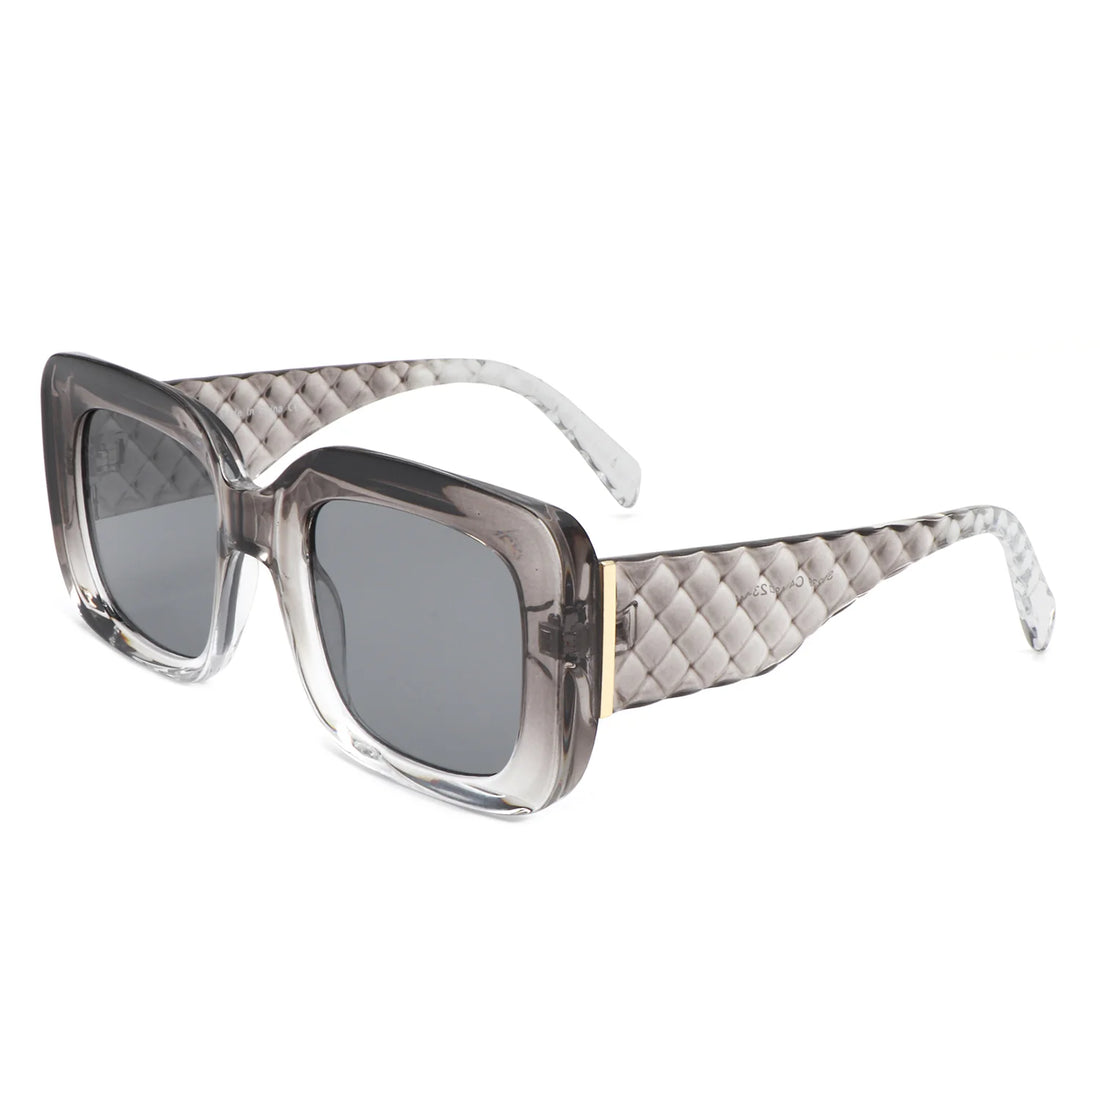 VR1239 - SQUARE CHUNKY FLAT TOP THICK FRAME FASHION SUNGLASSES